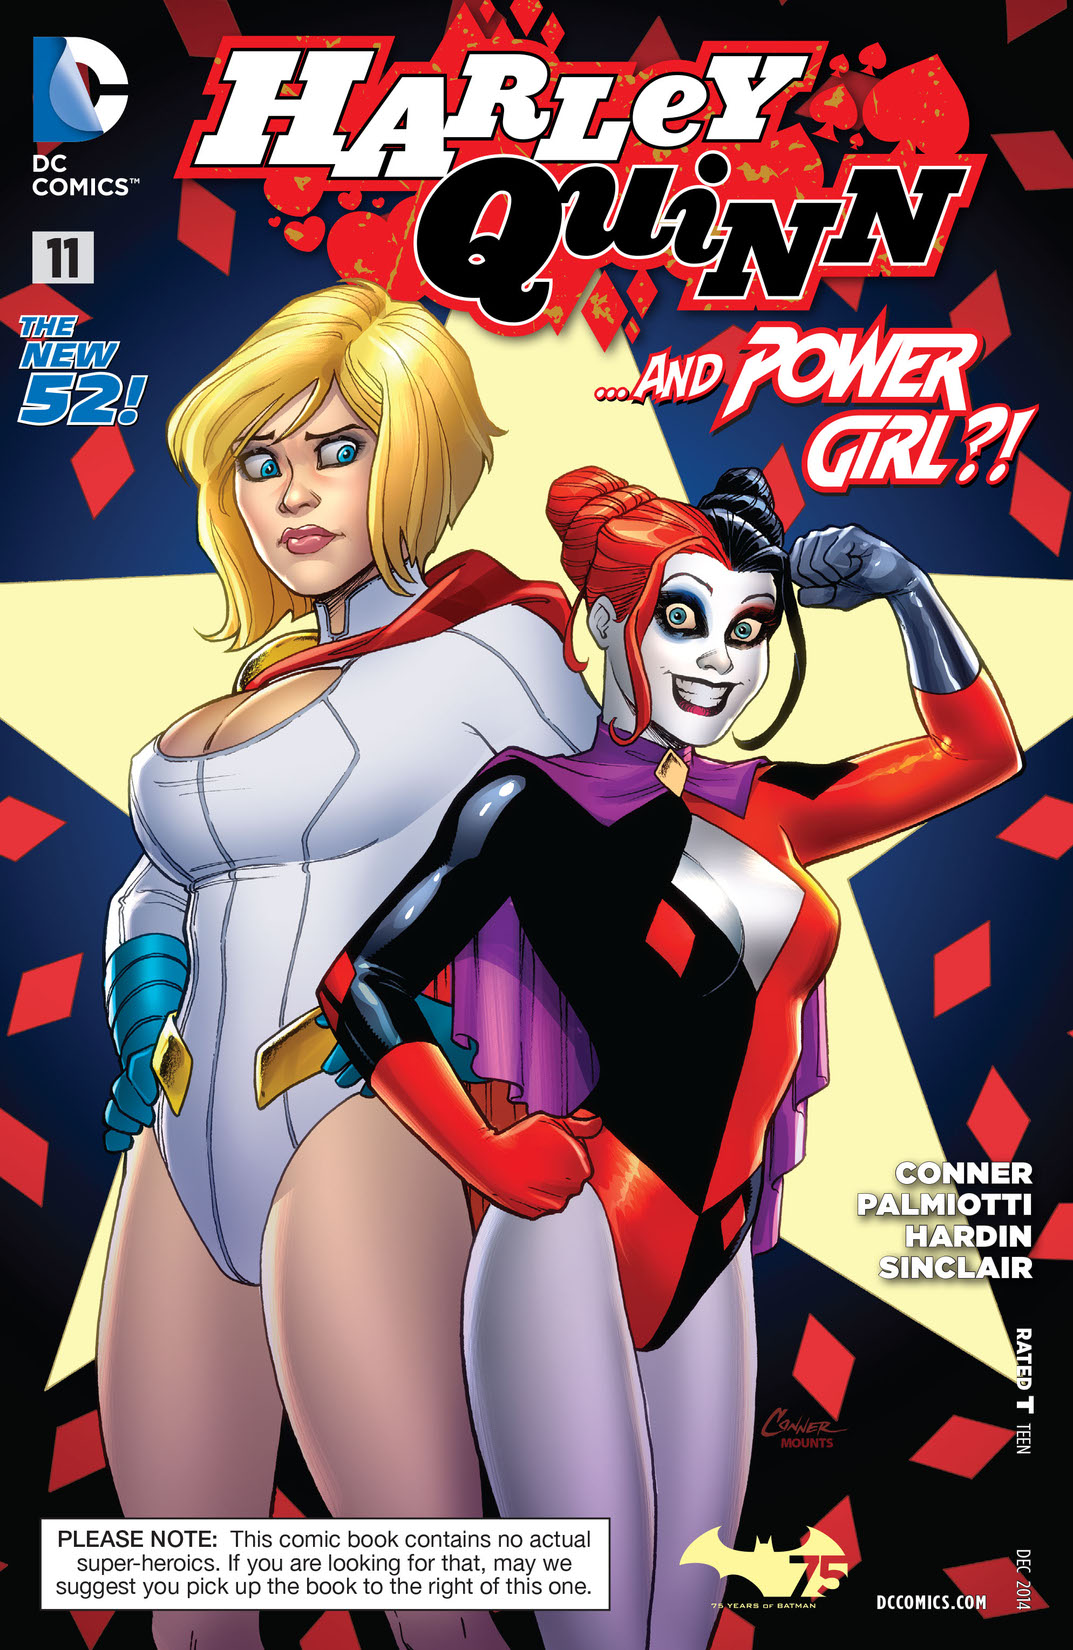 Harley Quinn (2013-) #11 preview images